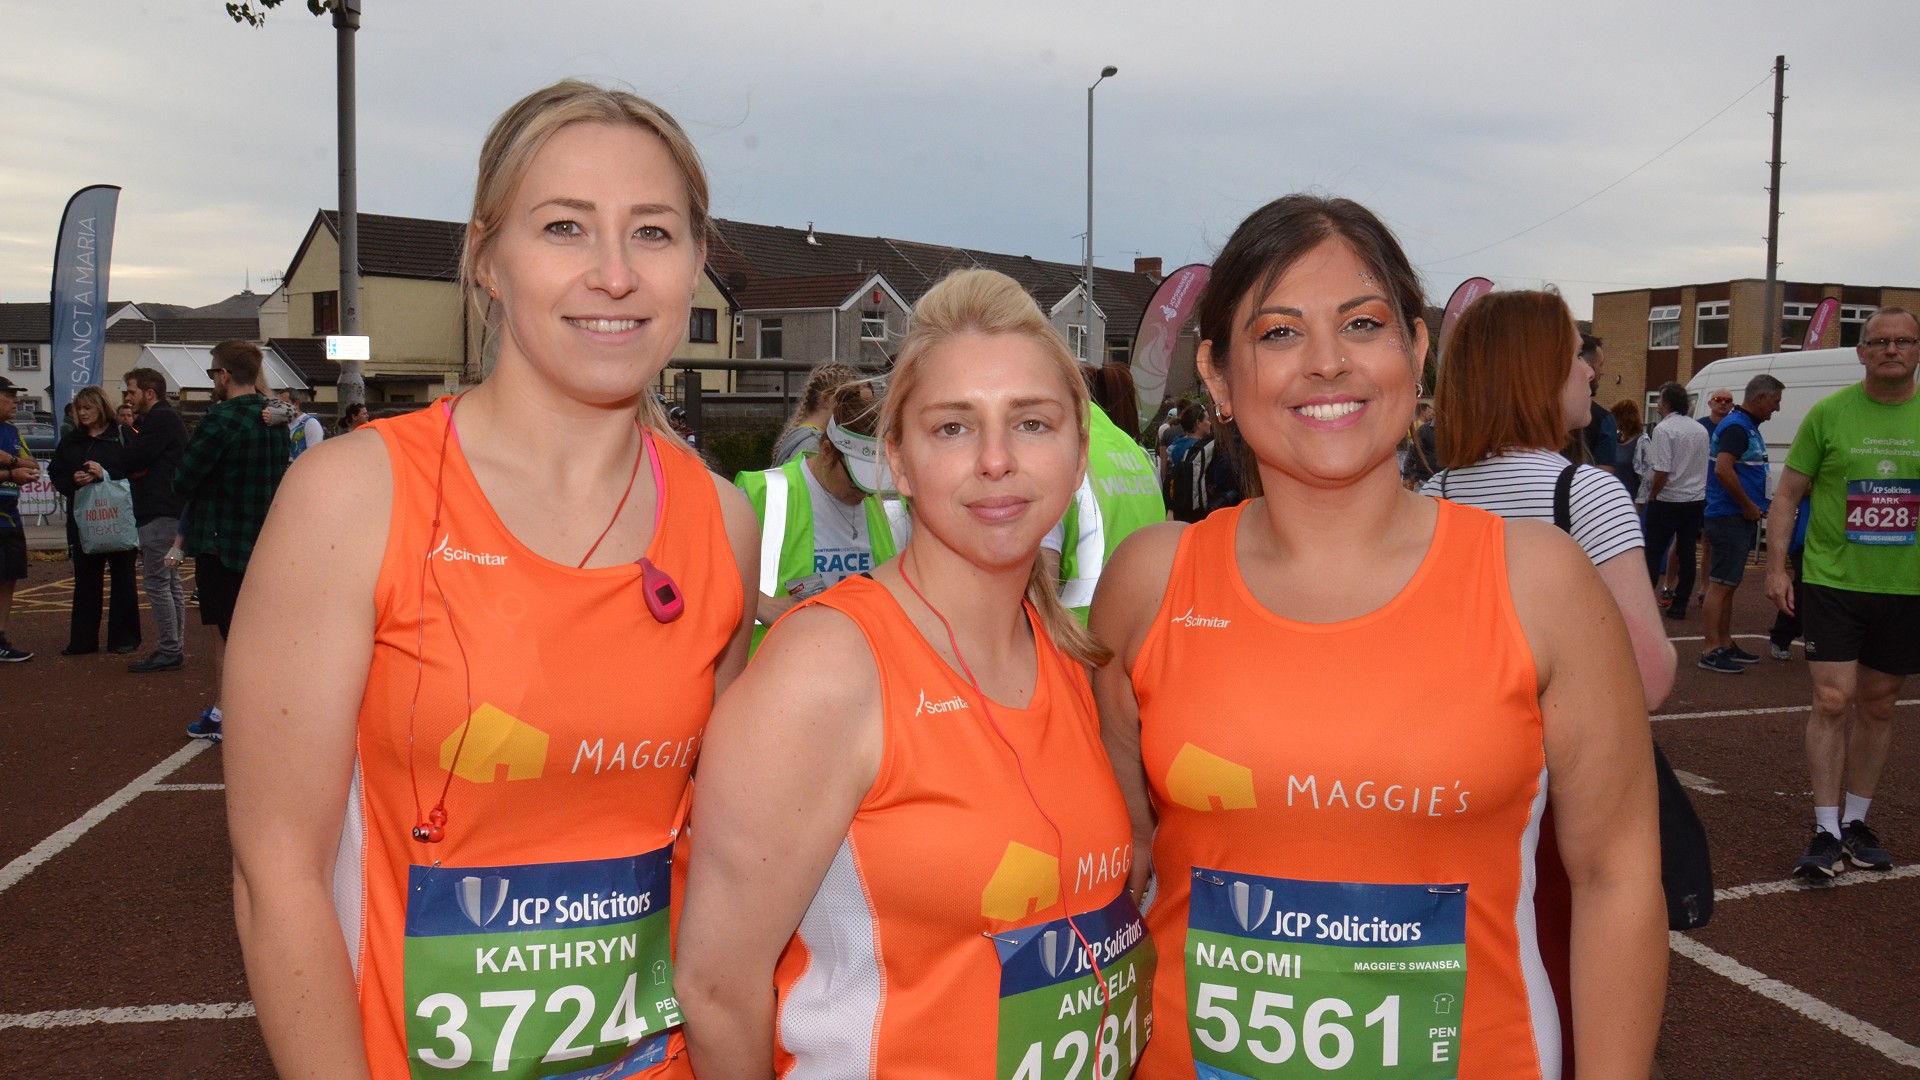 JCP Swansea Half Marathon Announces Maggie’s Cancer Care as Charity Partner of the Year